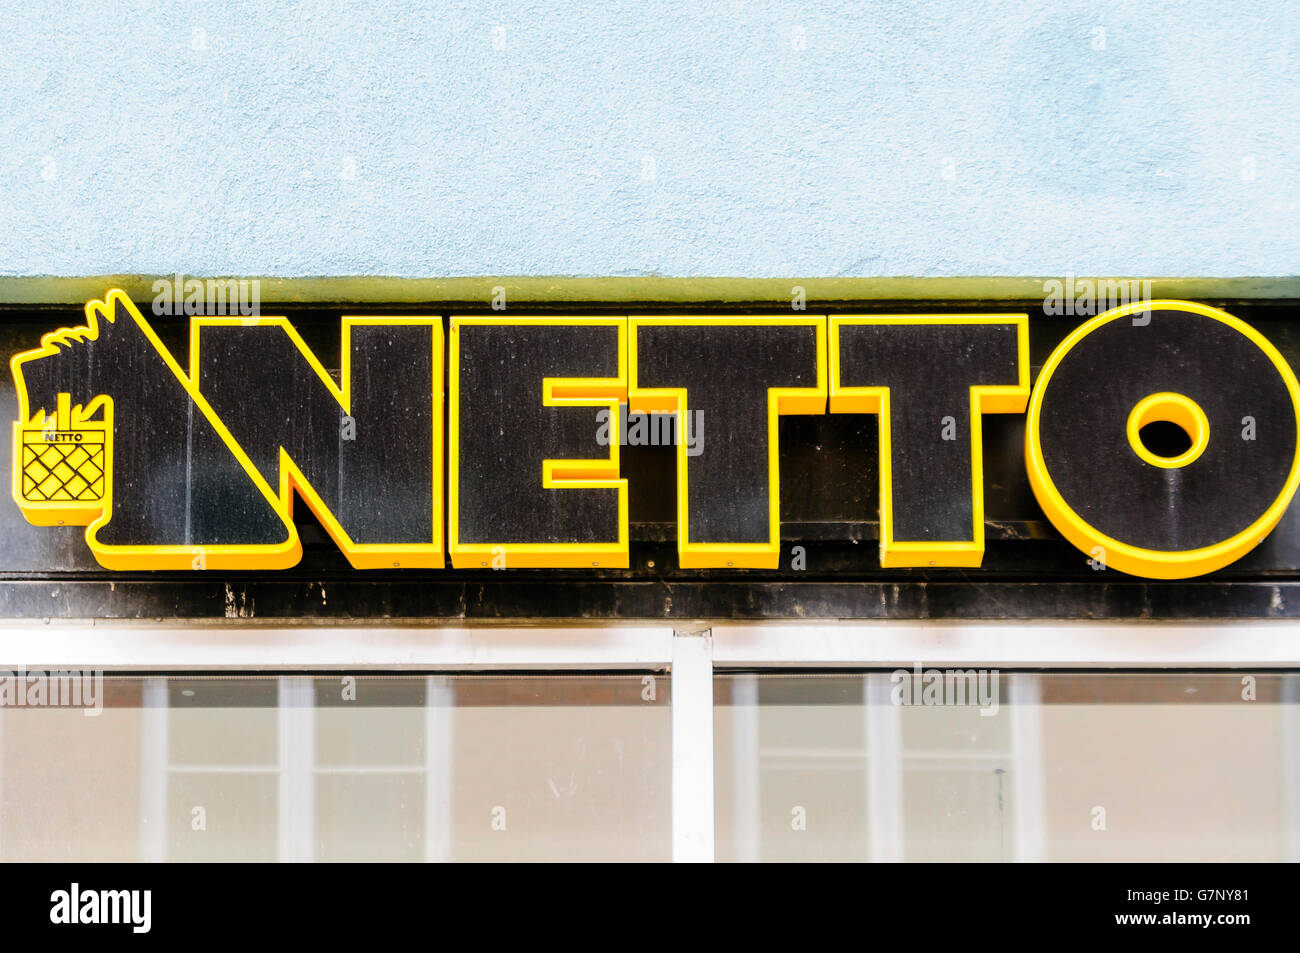 Sign for Netto, a Denmark based supermarket chain, with their Scottish Terrier logo Stock Photo